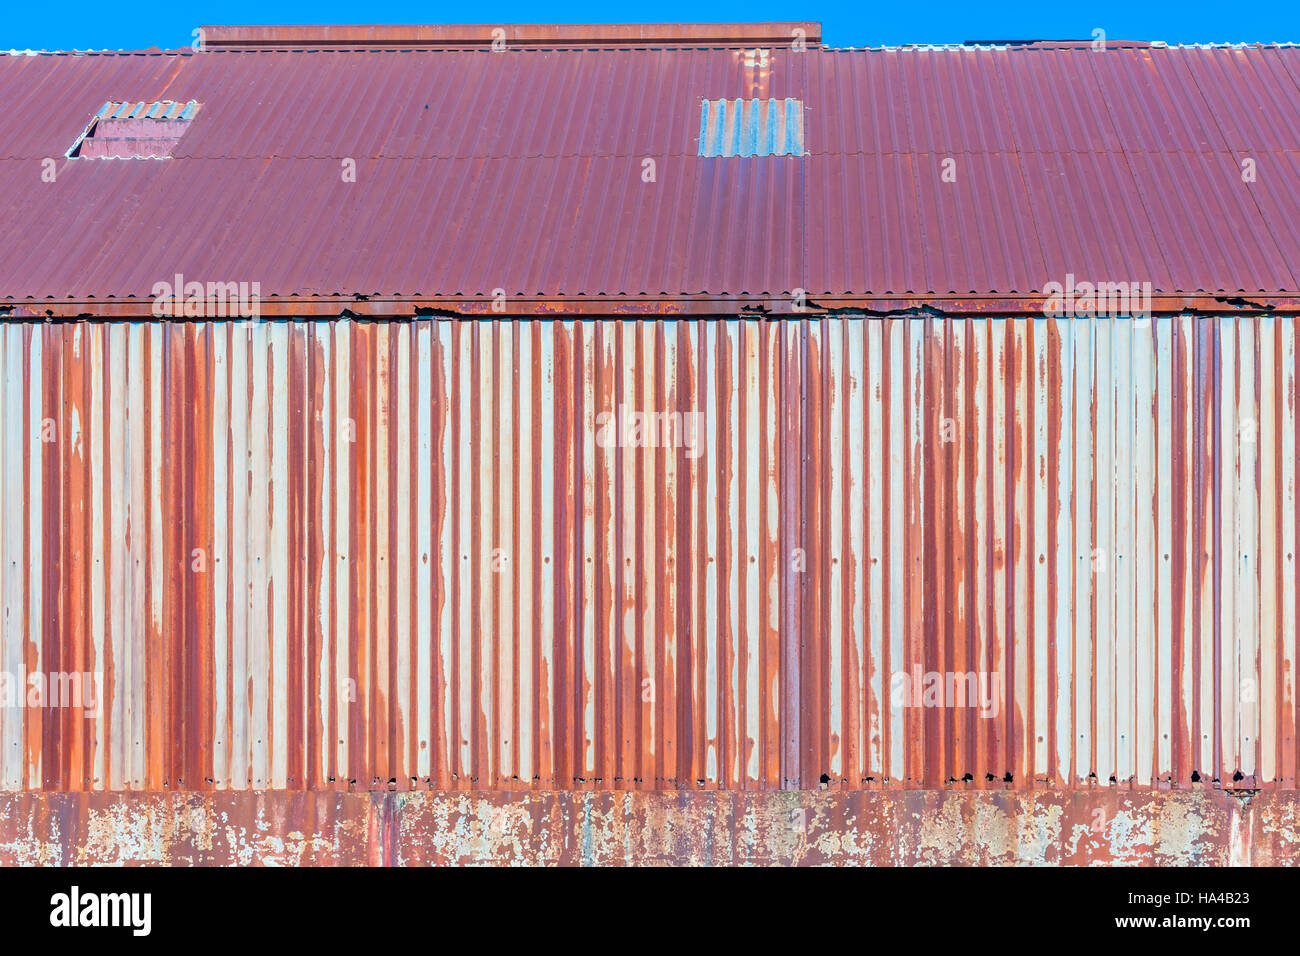 detail of a metal corrugated metal building complete with rust and red paint Stock Photo